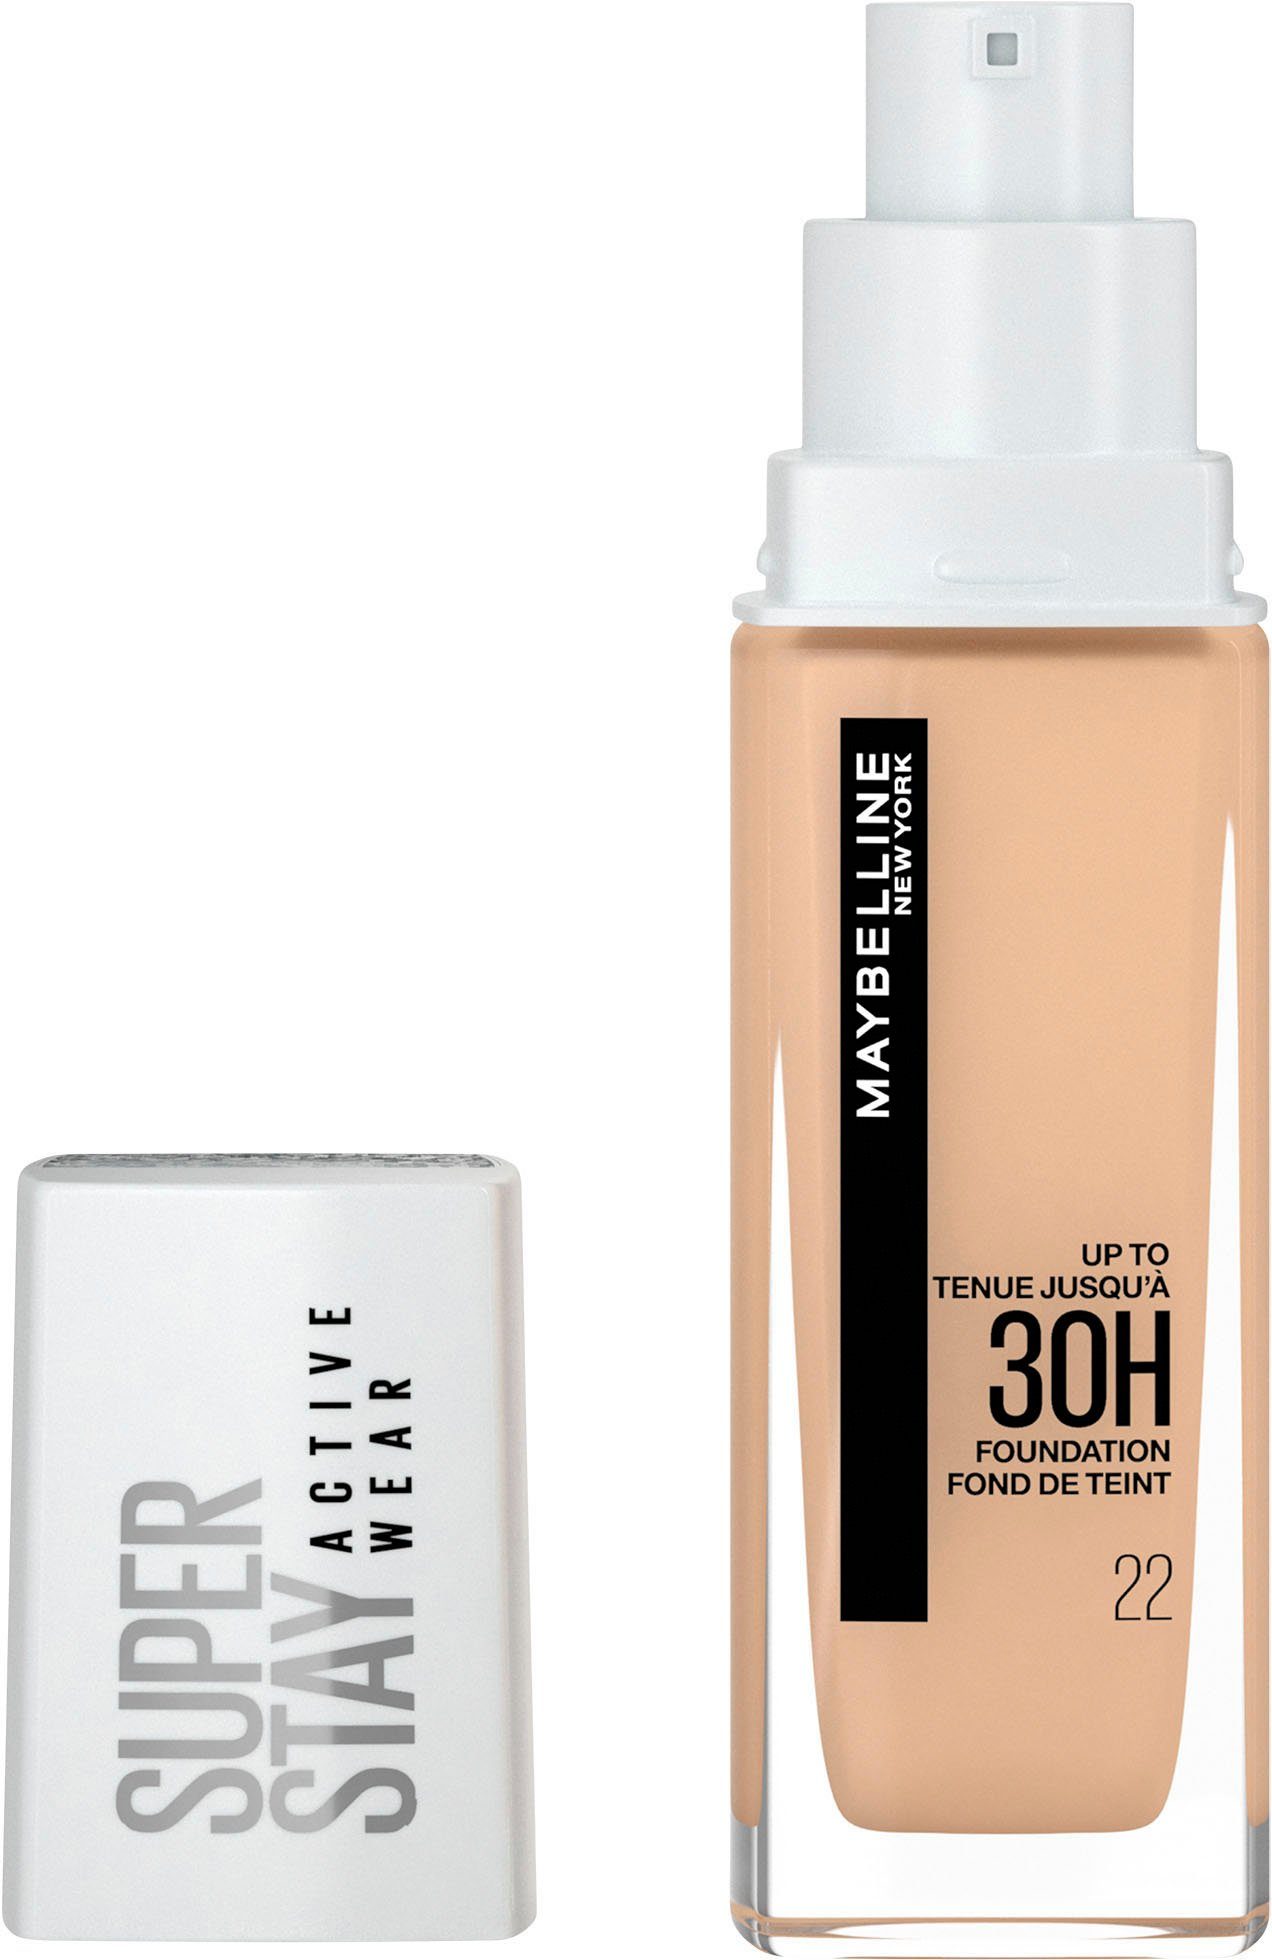 Wear 22 Foundation Super NEW Active YORK Stay Bisque Light MAYBELLINE